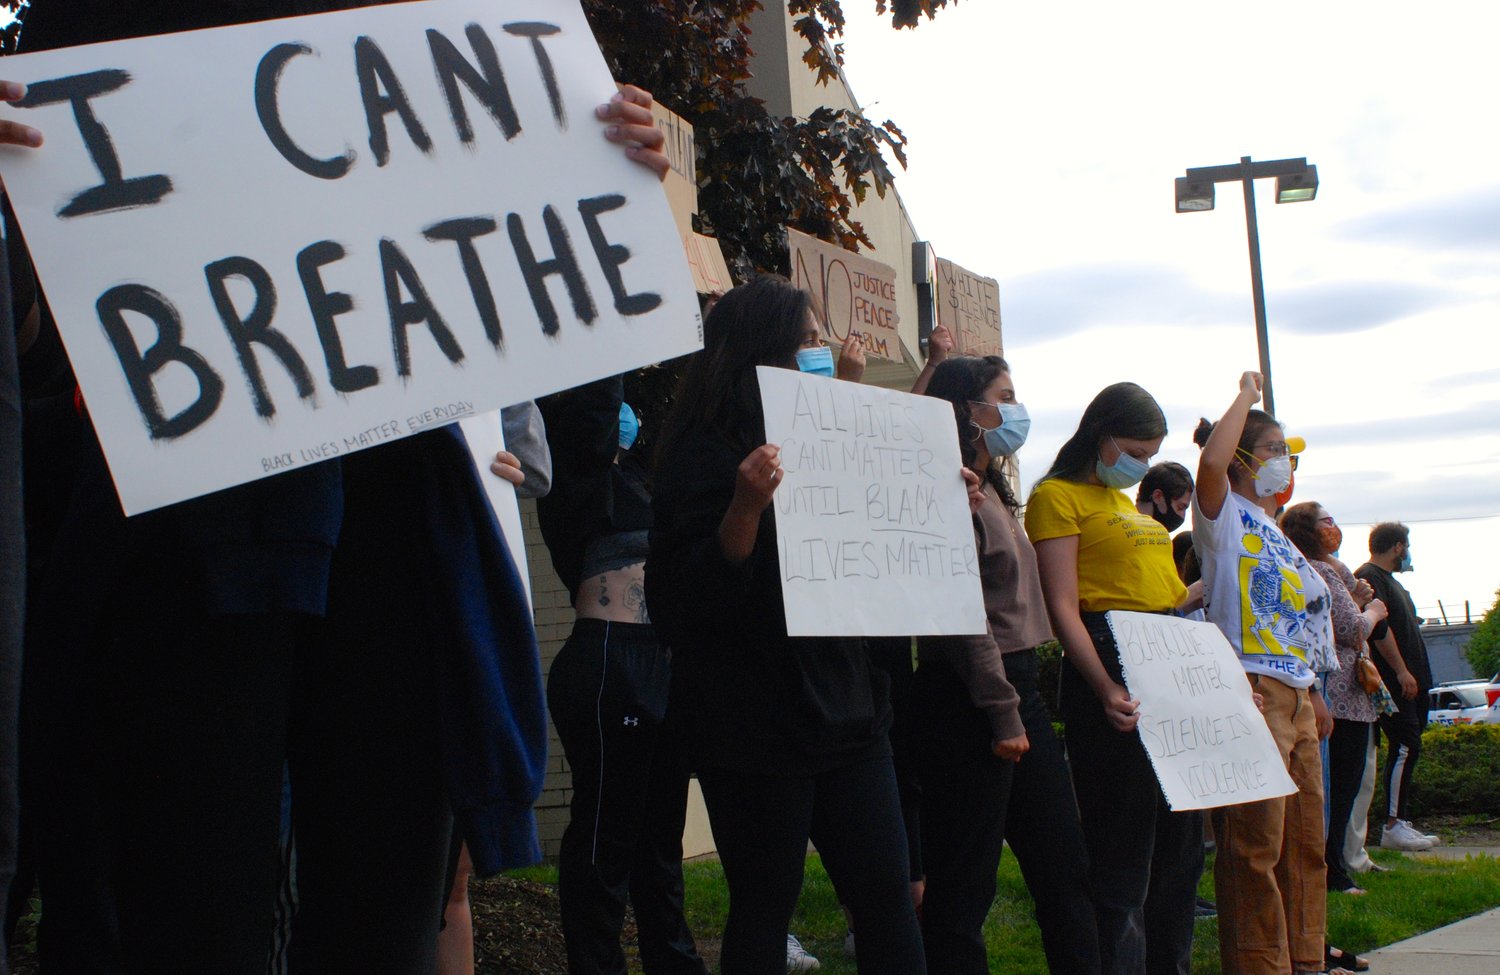 Many protesters wrote "I can't breathe" on their signs. George Floyd died after a Minneapolis police officer pressed his knee into his neck for more than eight minutes. Floyd had pleaded with the officer, telling him that he could not breathe.